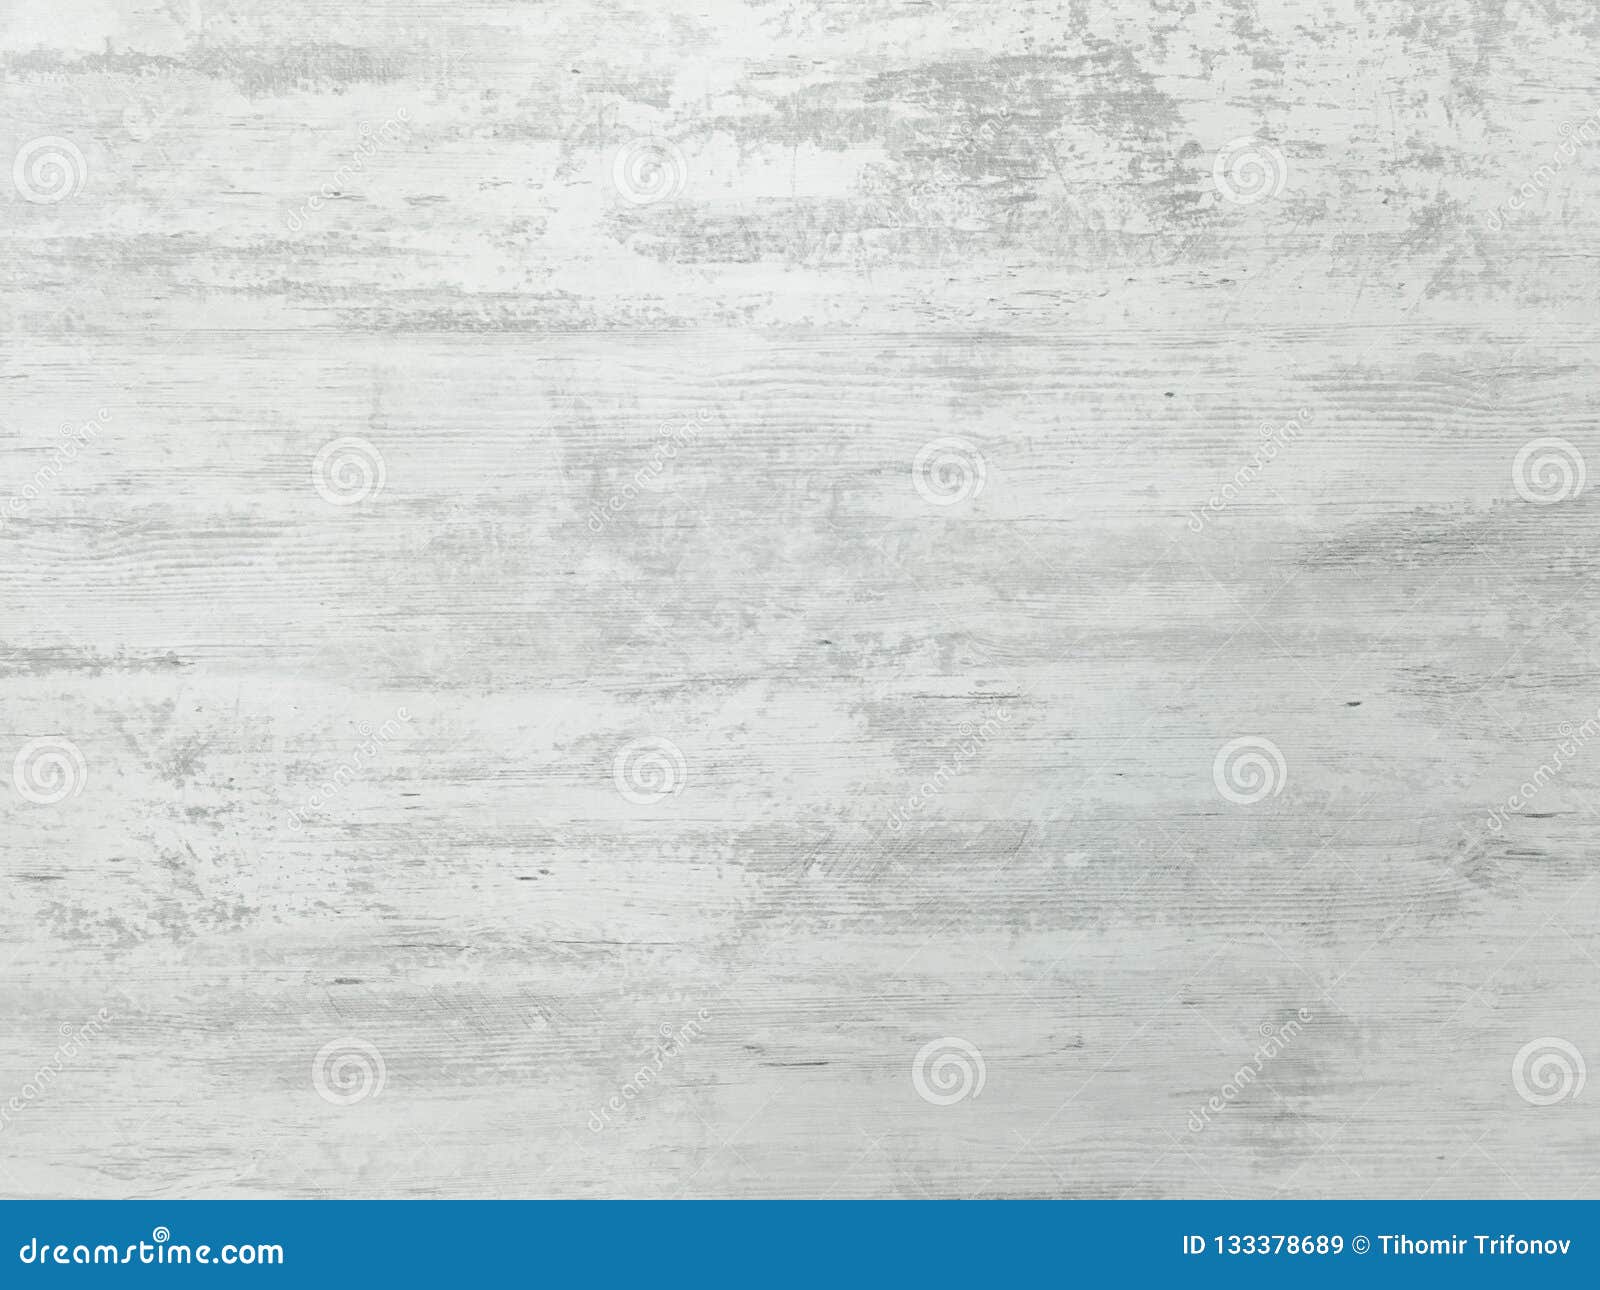 Washed Wood Texture White Wooden Texture Background Stock Image Image Of Clean Faded 133378689